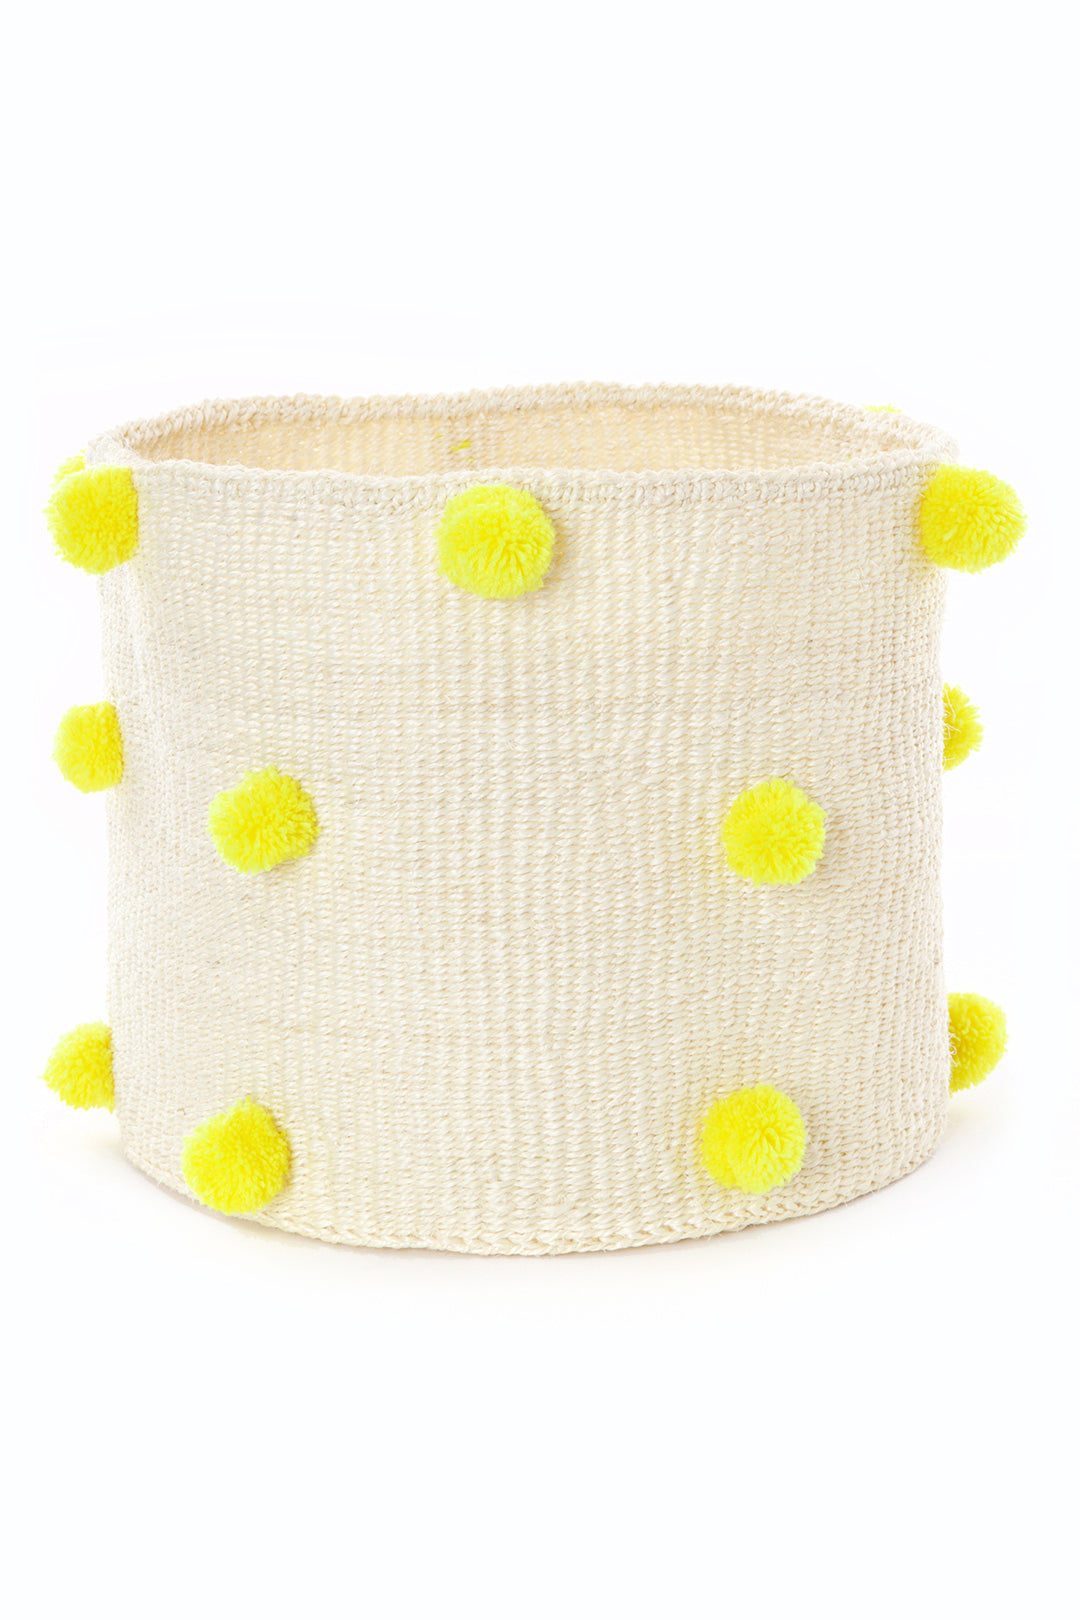 Natural Sisal Bin with Yellow Pom Poms